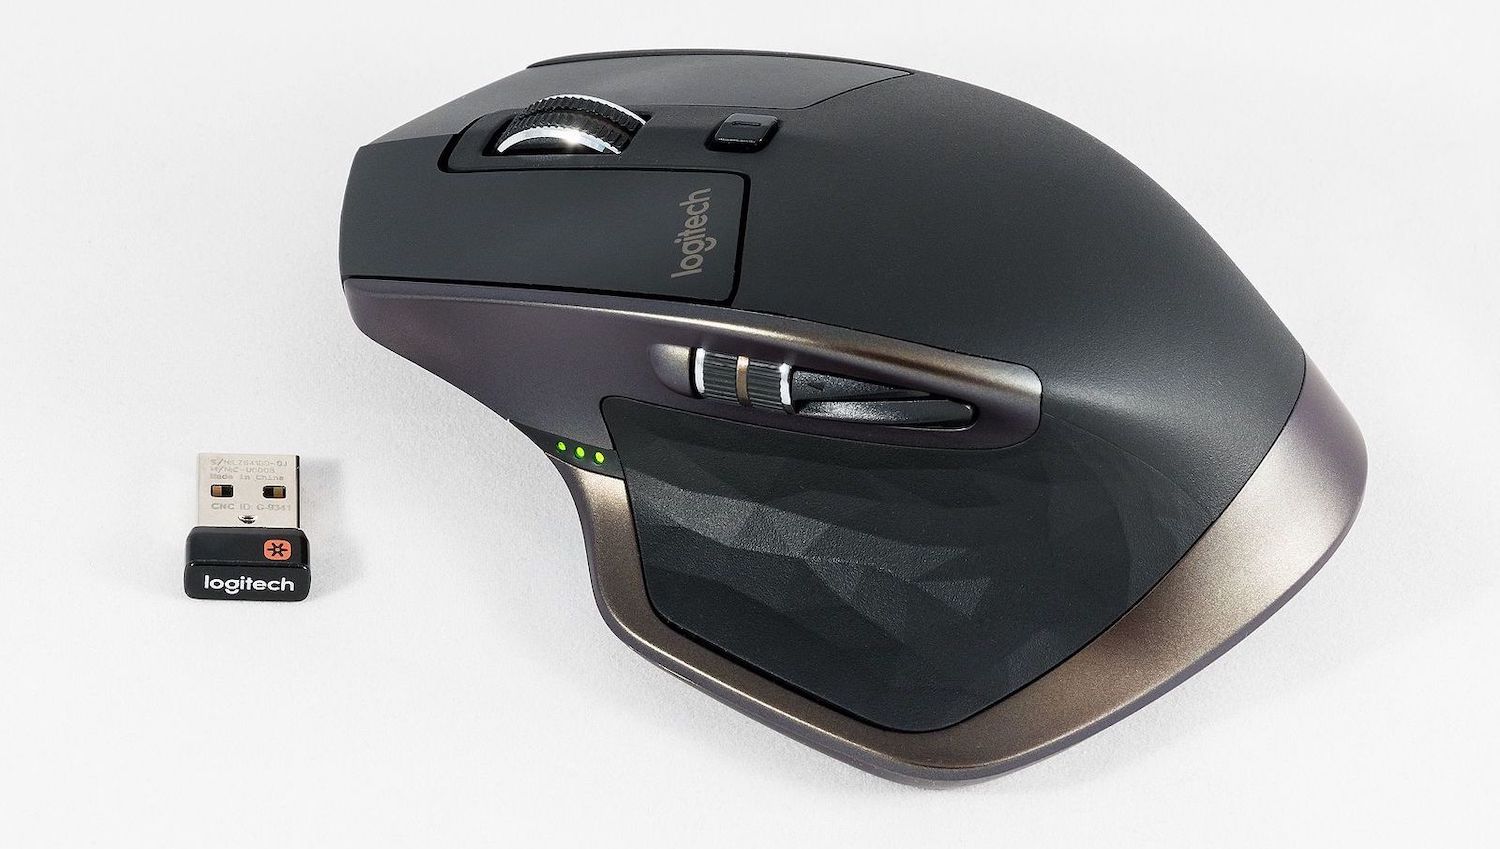 Logitech mouse with a unifying receiver.